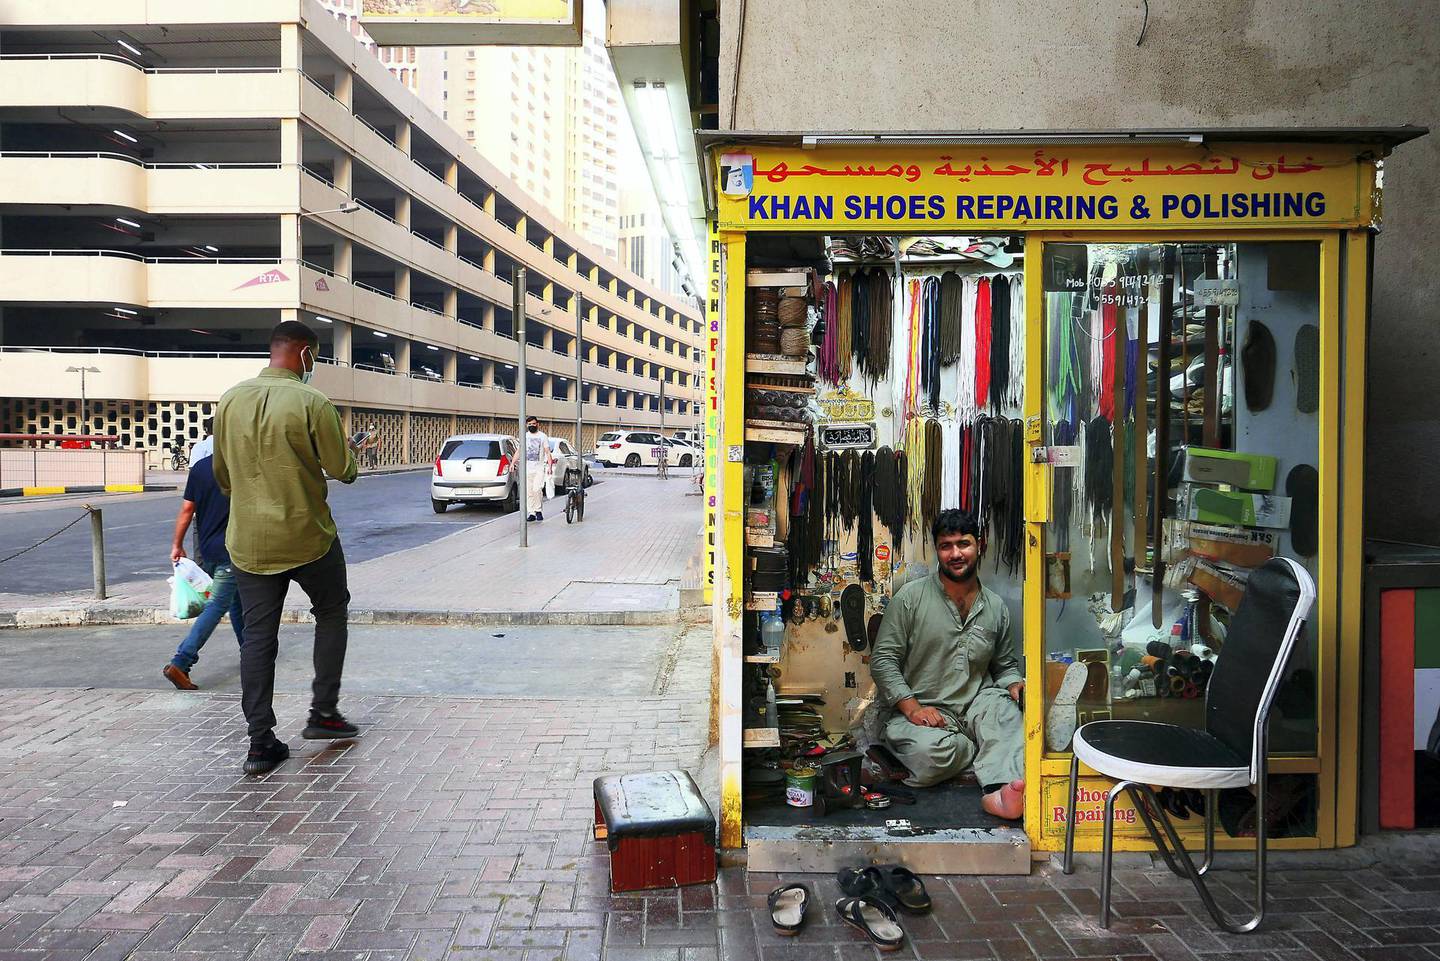 Khan shoes shop in Deira Dubai during the evening on April 21, 2021. Pawan Singh / The National. Story by Sarwat Nasir